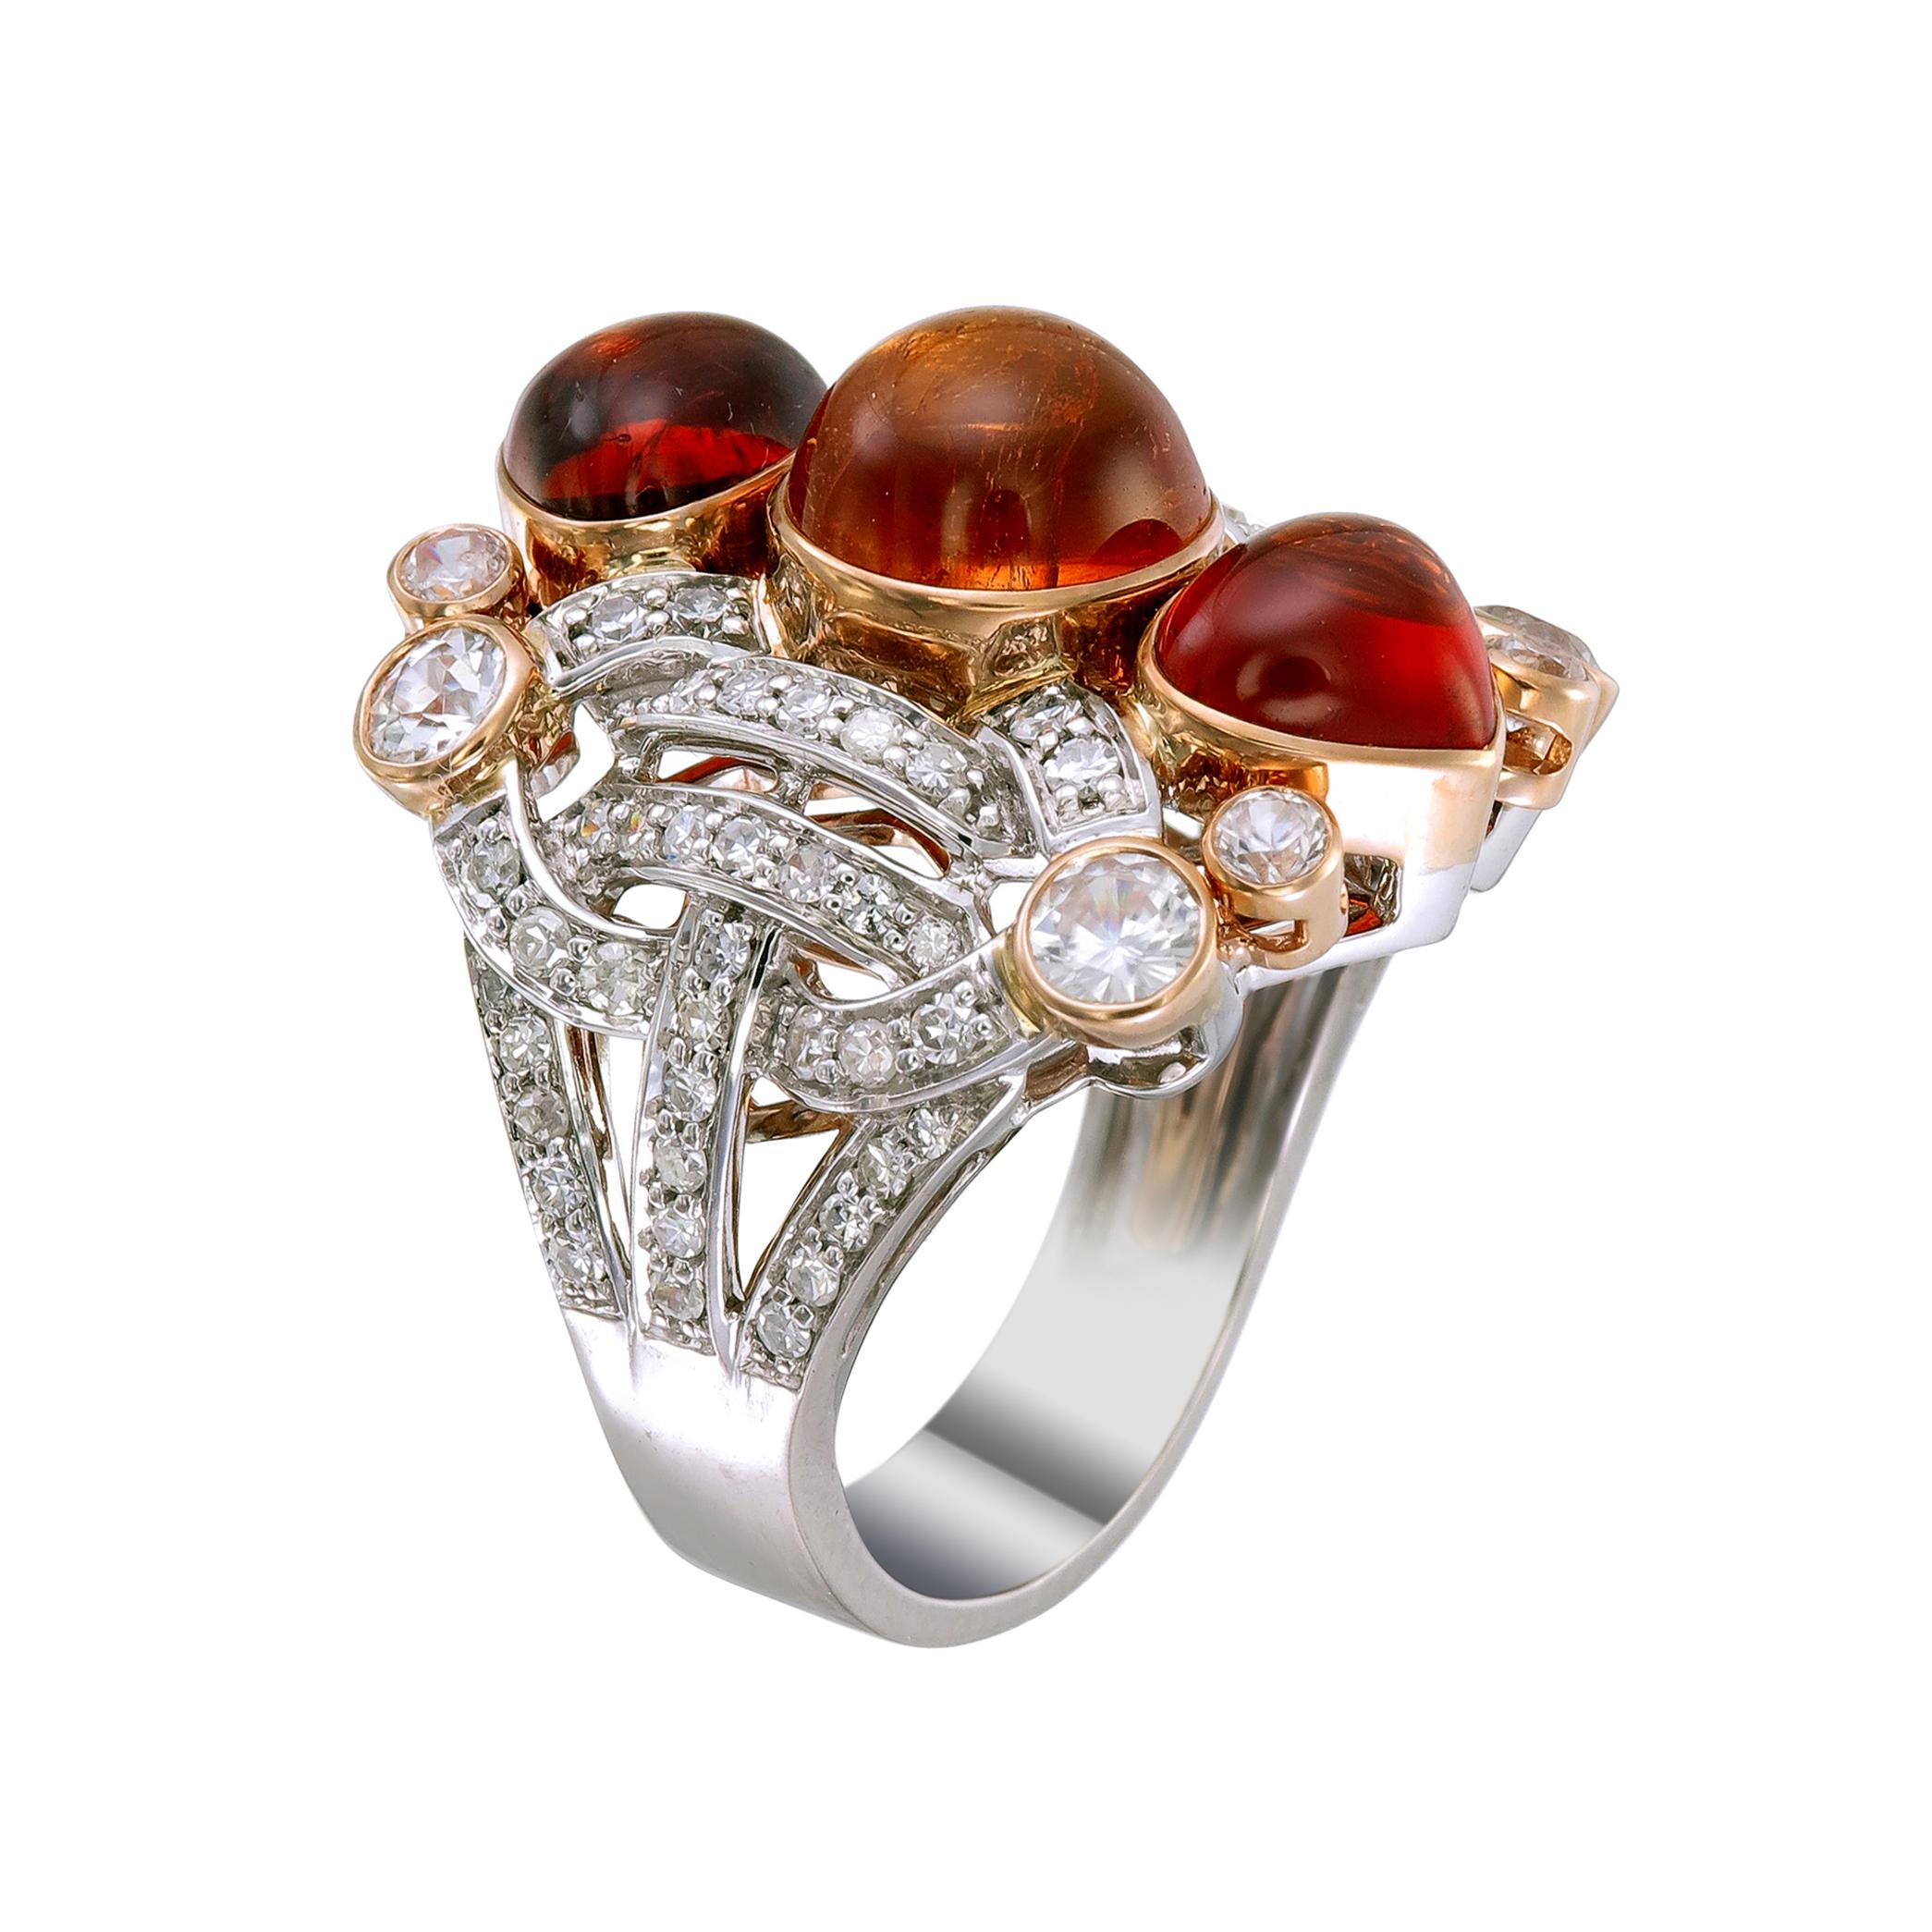 Three round cabochon spessartite garnets totaling more than 10.13-carats in varying shades of orange shine brightly on this 18k white gold and palladium ring paved with 0.80-carat diamonds and 1.50-carat of white sapphires. 

This ring, as with all